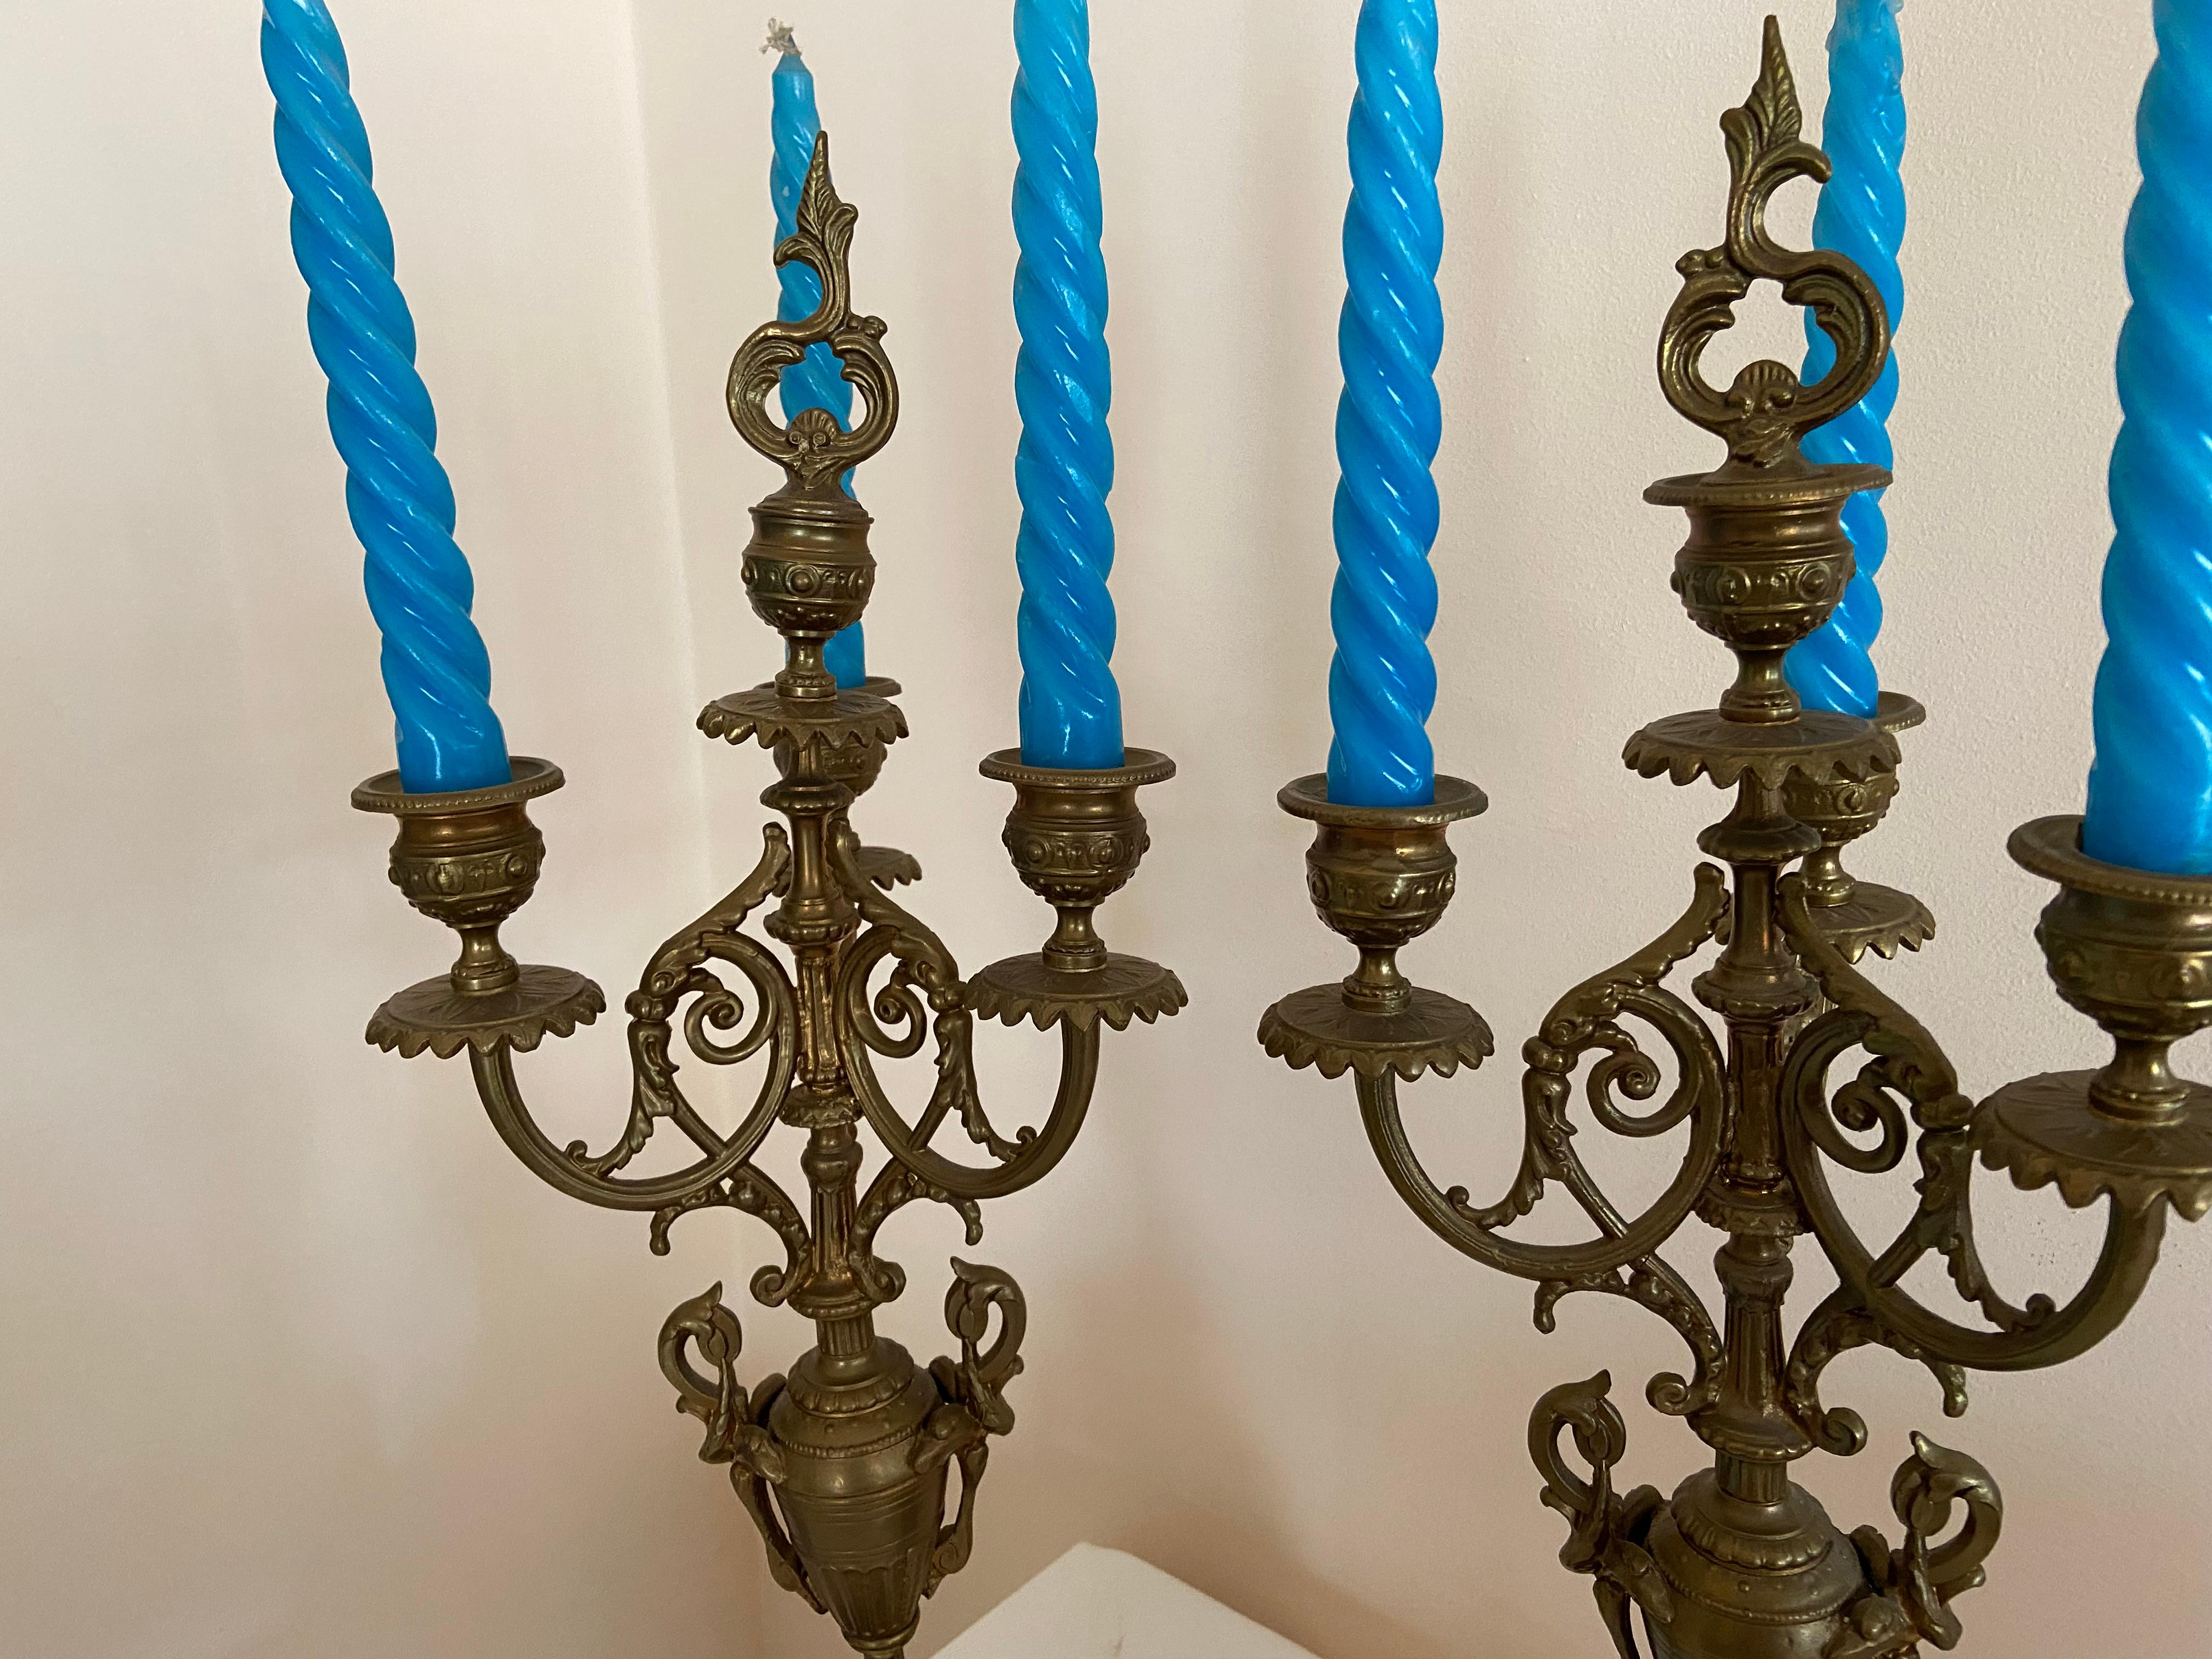 Pair of solid brass and marble candelabra, 4 Flames,1950s.
Each is 55cm tall and 19cm wide.